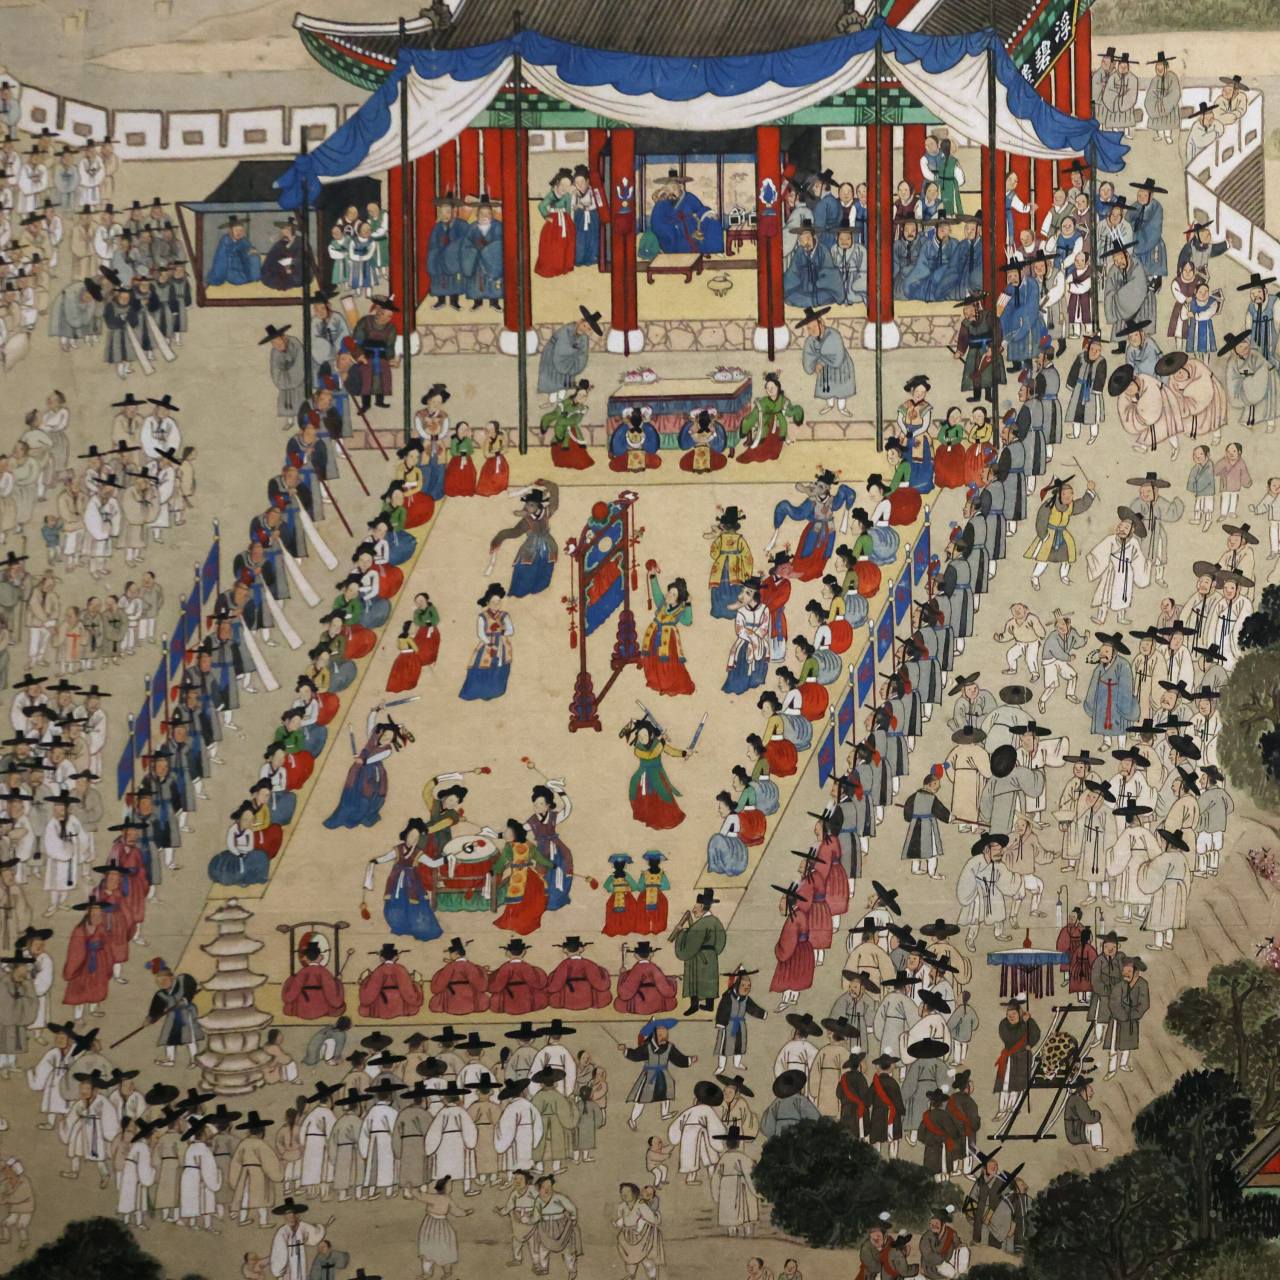 Entertainers perform in the Bubyeongnu yeonhoedo section of the “Welcoming Banquet for the Governor of Pyeongan” by Joseon painter Kim Hong-do (1745-1806) on display at the National Museum of Korea in Seoul.Photo © Hyungwon Kang